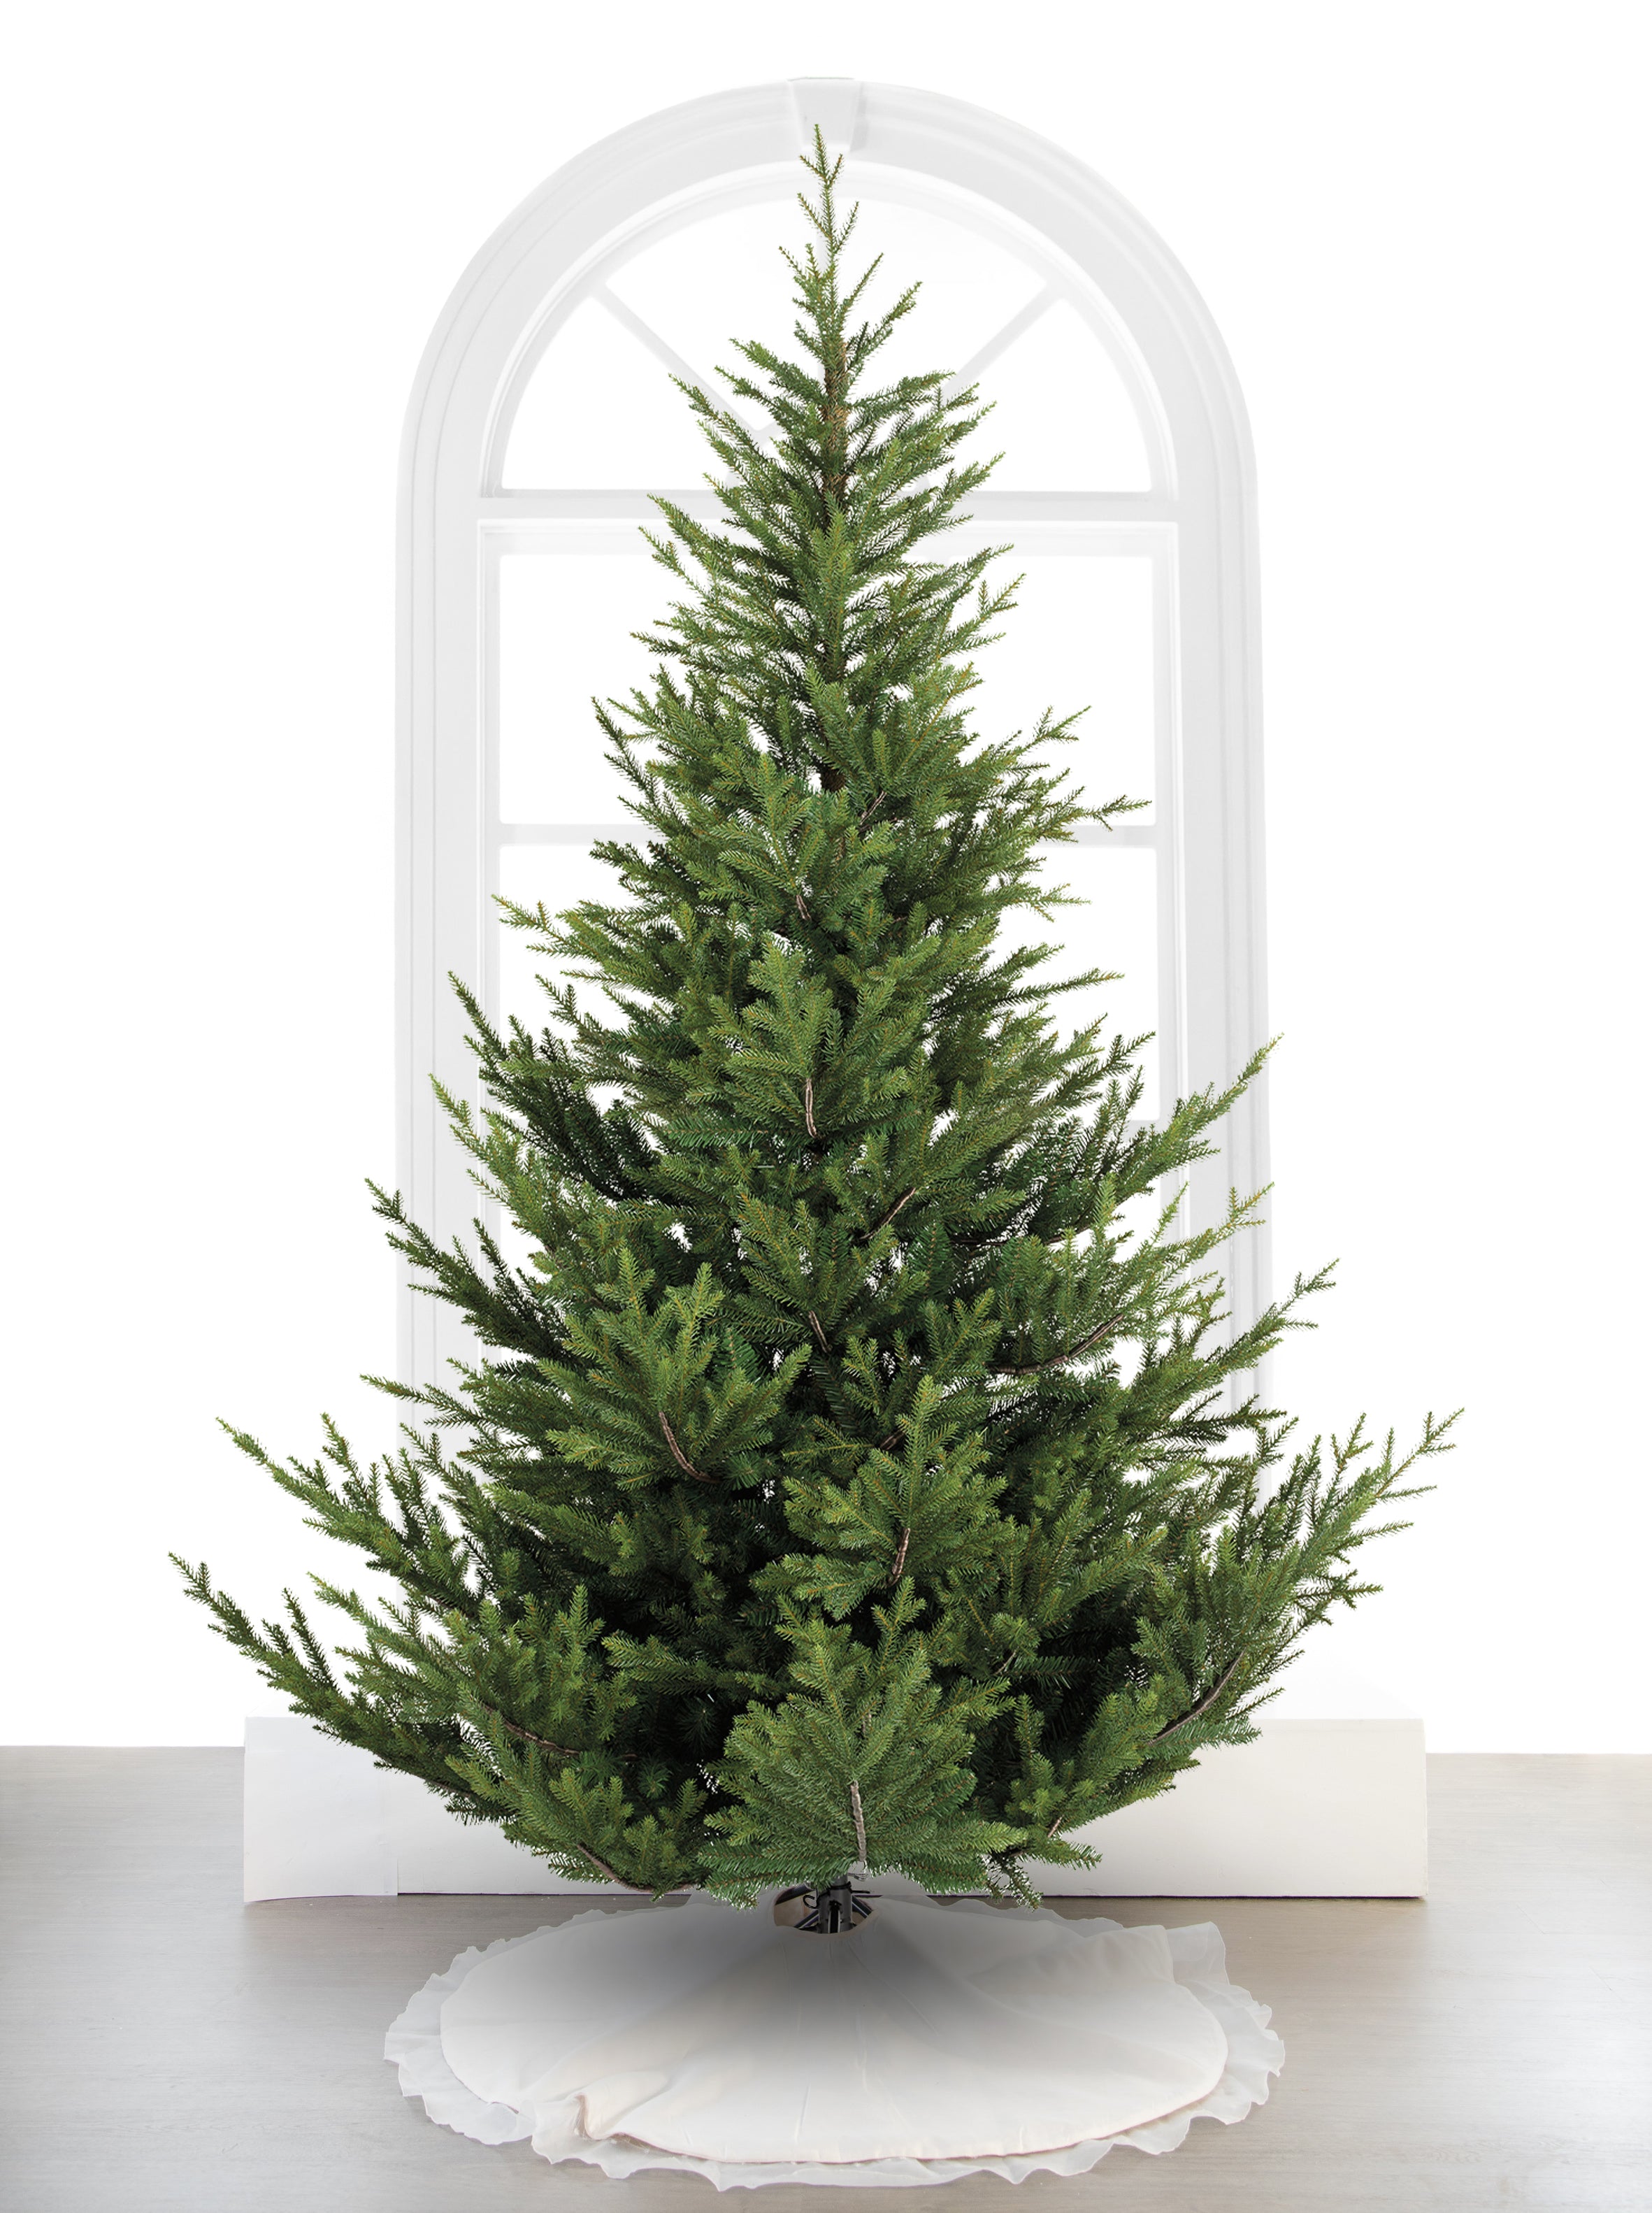 Image of 9 FT NORWAY SPRUCE TREE PRE LIT WARM WHITE LED LIGHTS